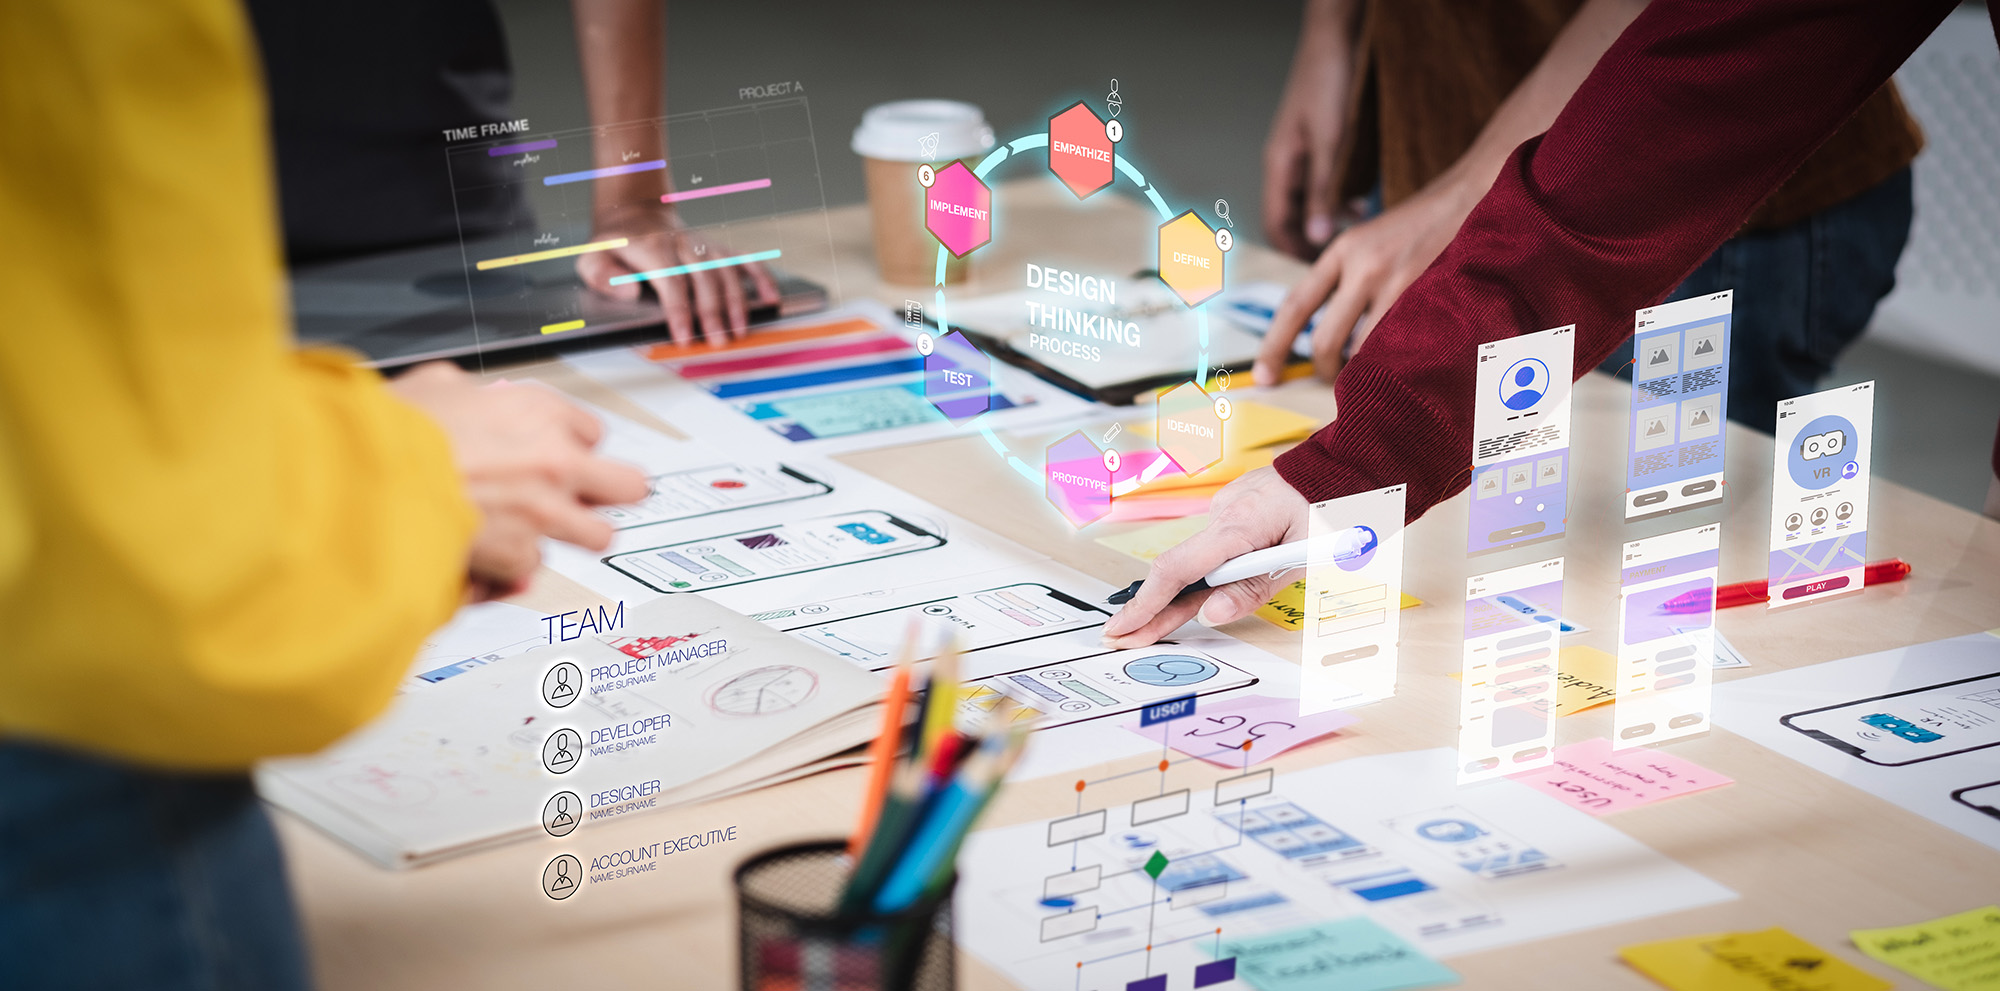 How is UX Design impacting the world?